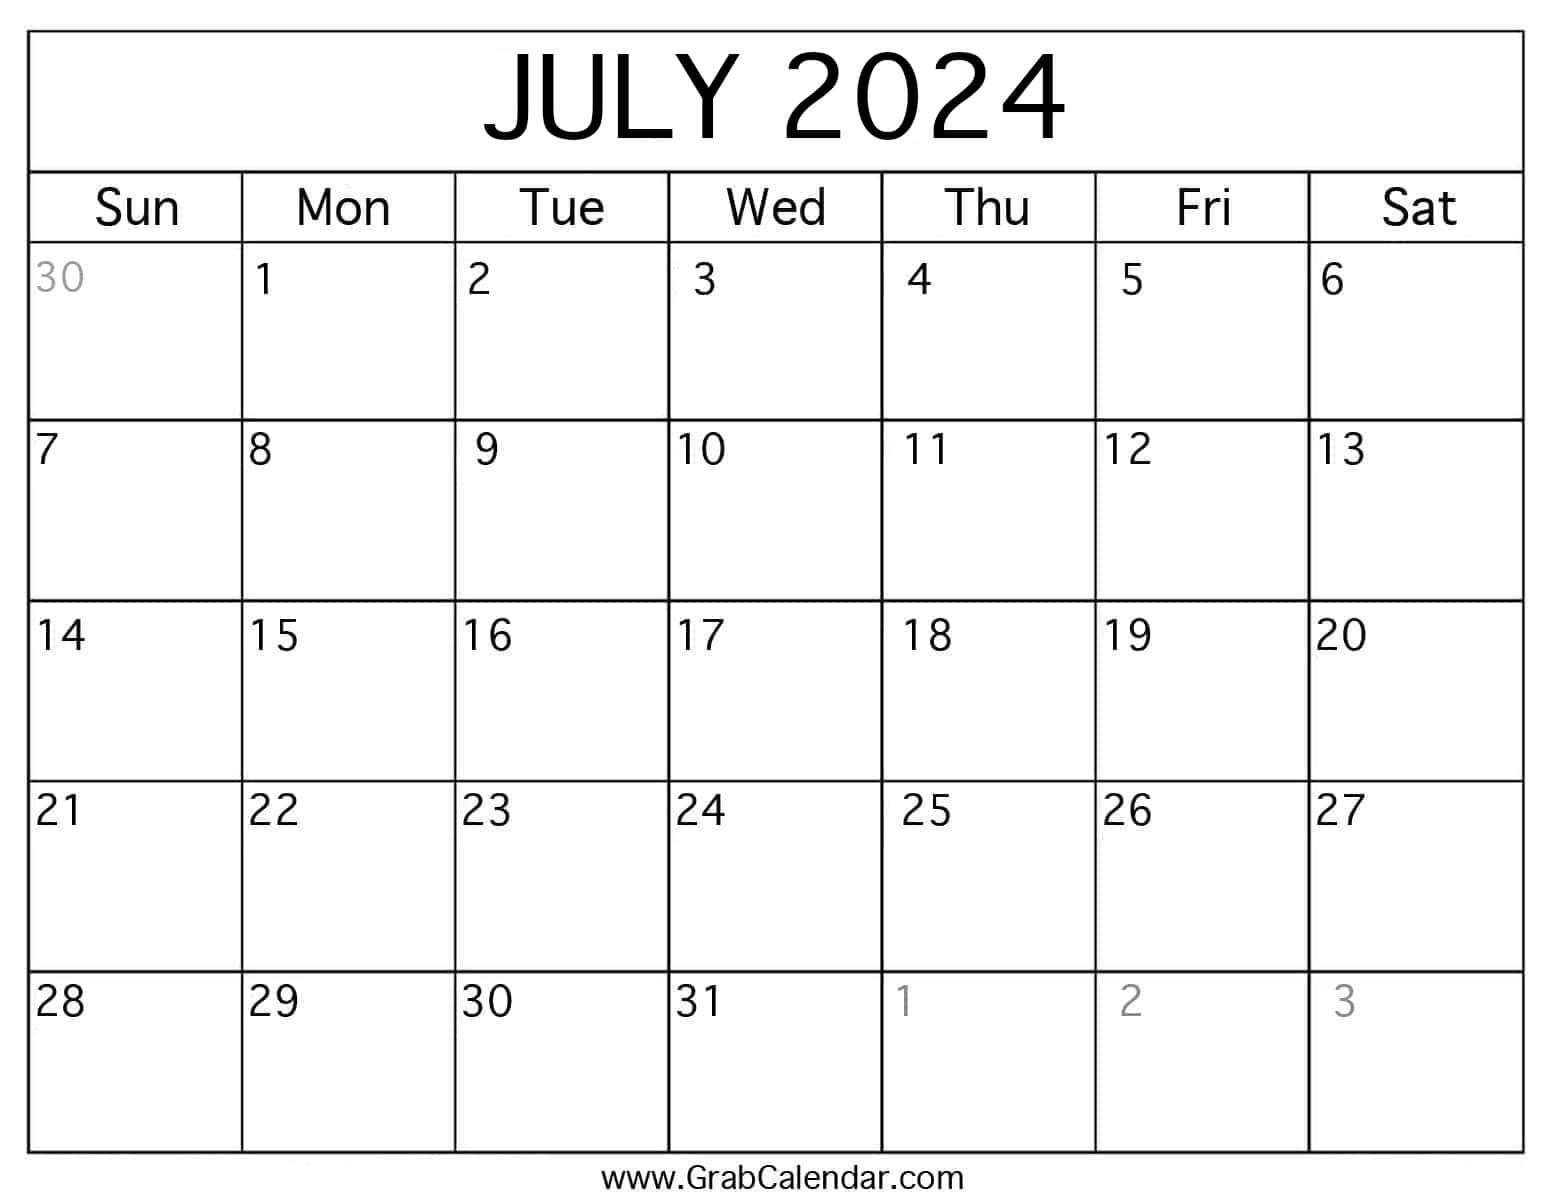 Printable July 2024 Calendar throughout Calendar Month of July 2024